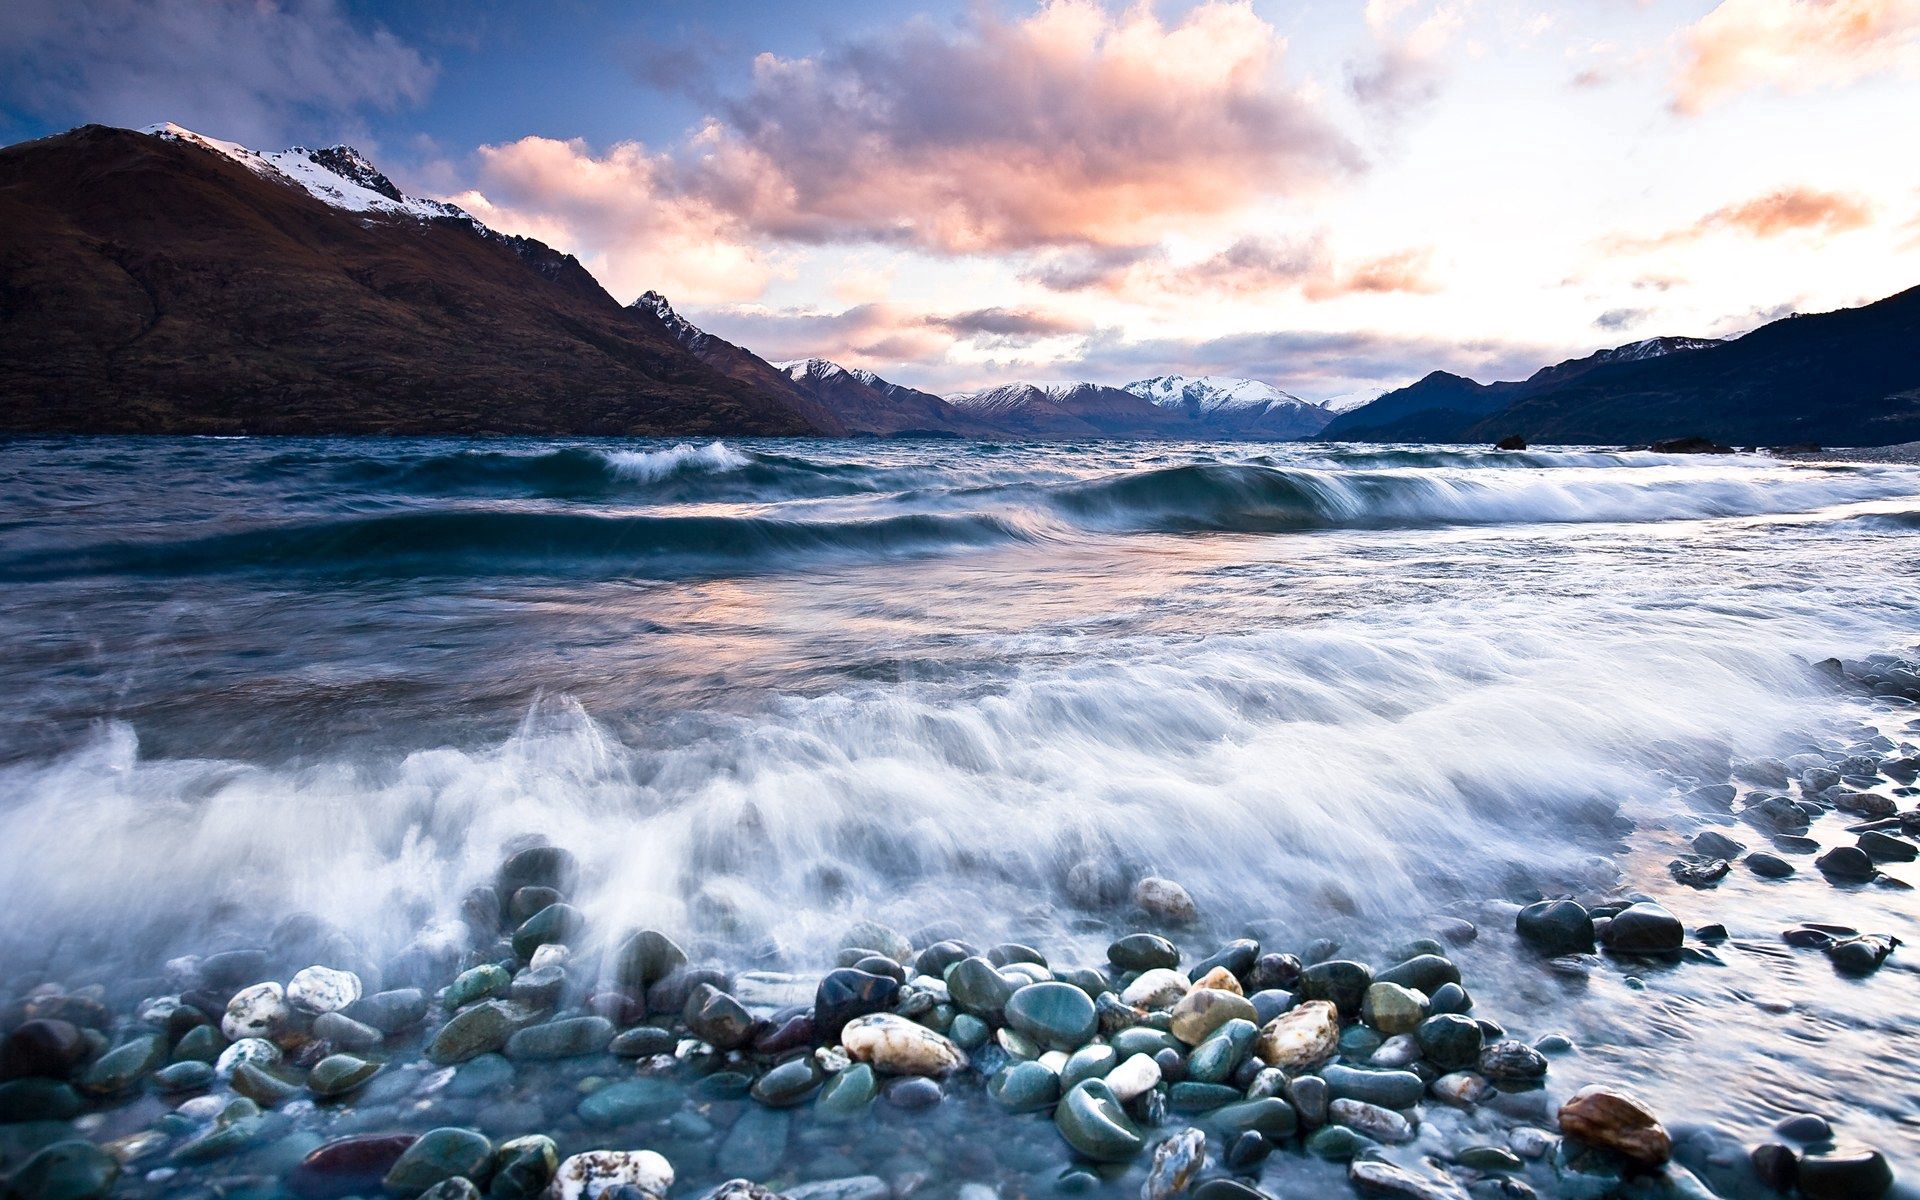 clouds, water, nature, stones, mountains, beach, foam, wave